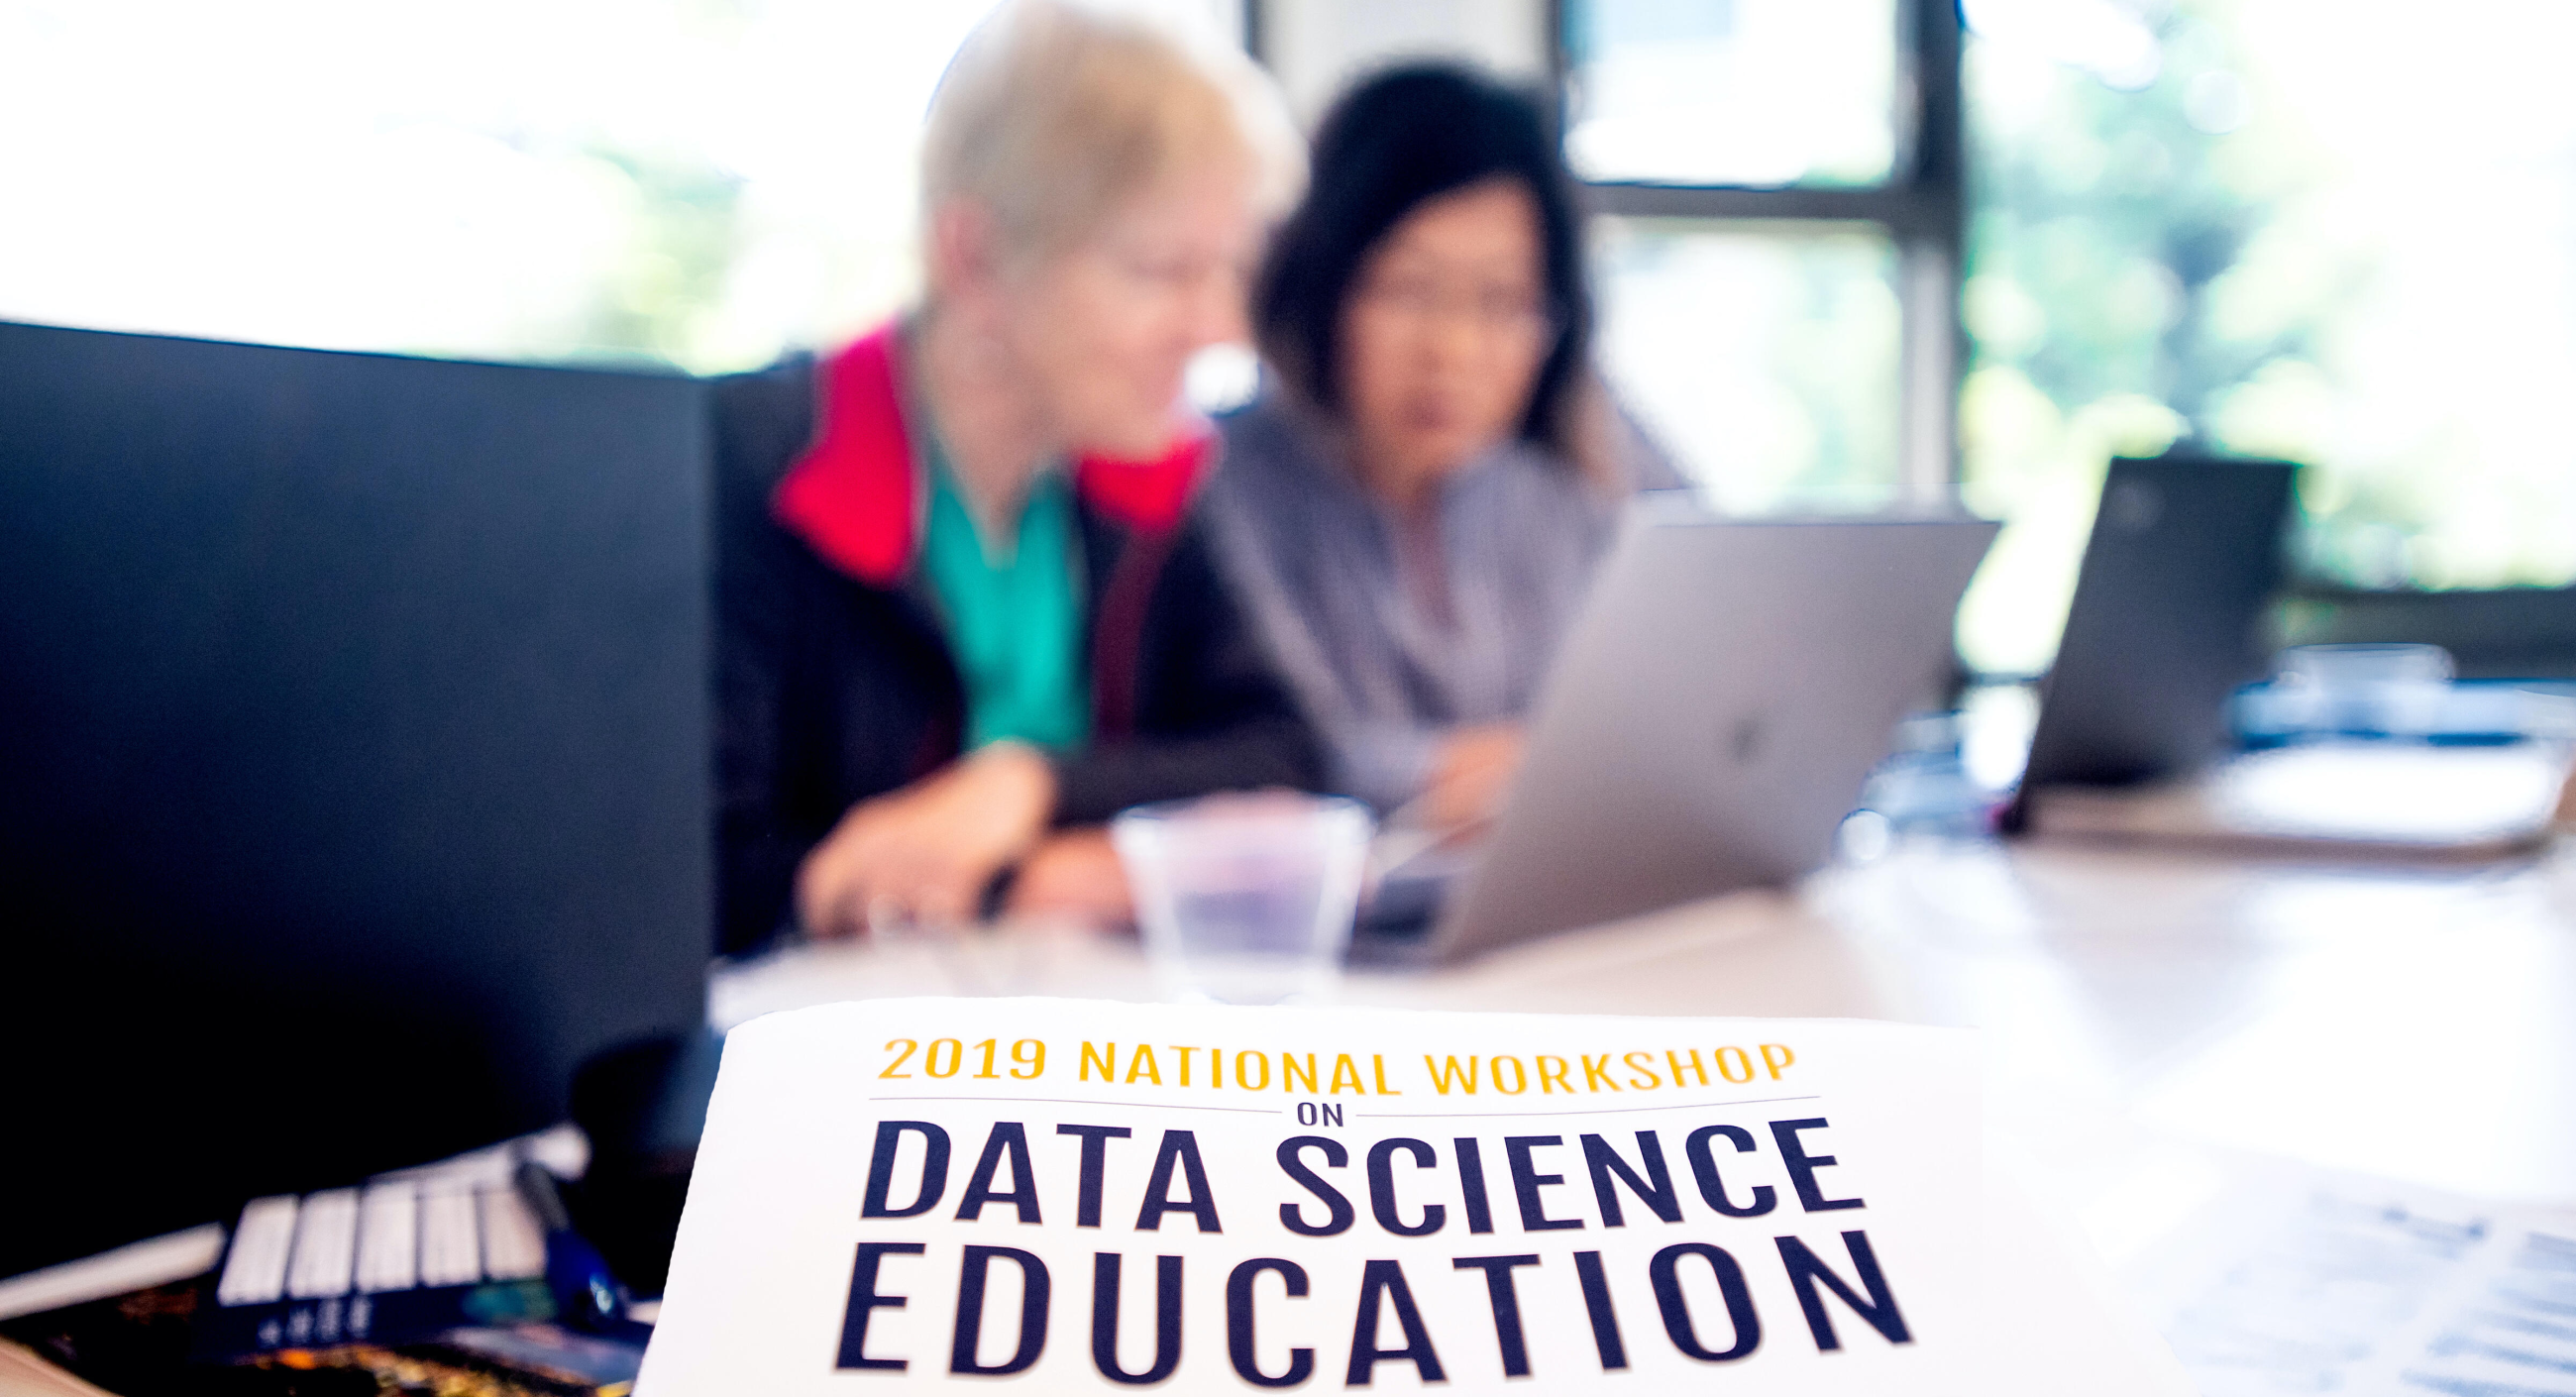 Two people in background looking at laptop, paper in foreground with words "2019 National Workshop on Data Science Education"